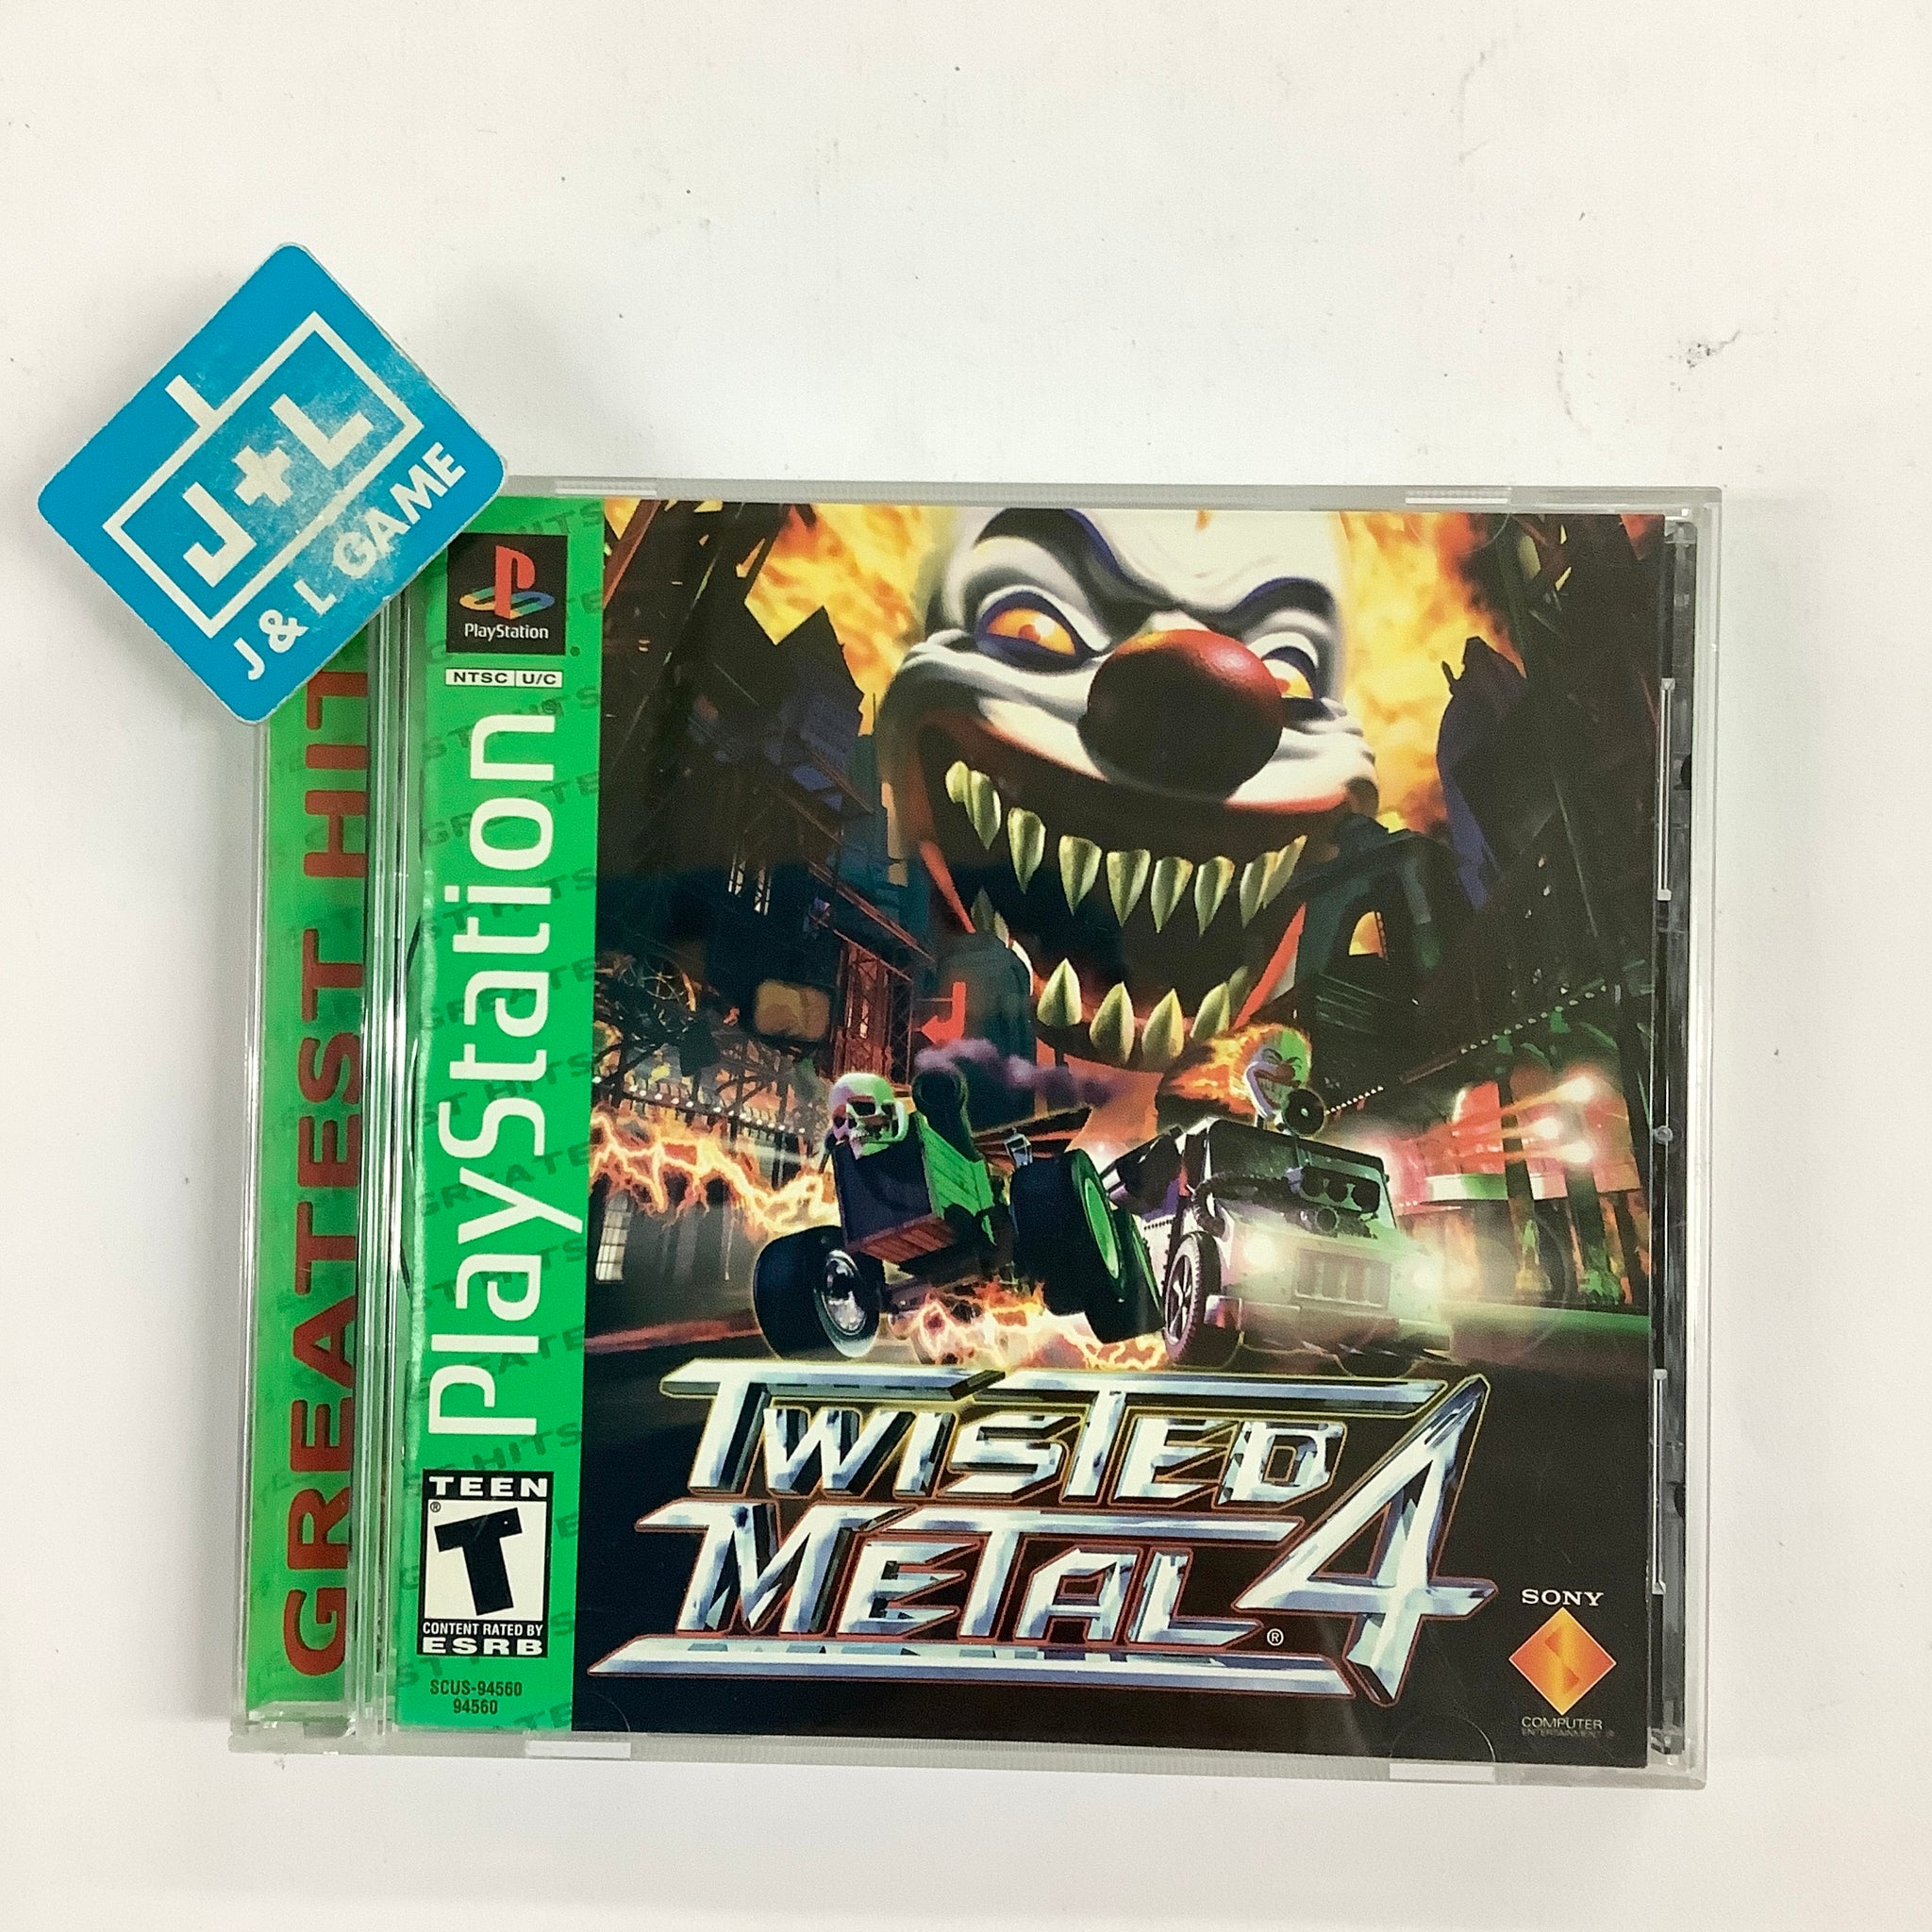 Twisted Metal 4 (Greatest Hits) - (PS1) PlayStation 1 [Pre-Owned] Video Games 989 Studios   